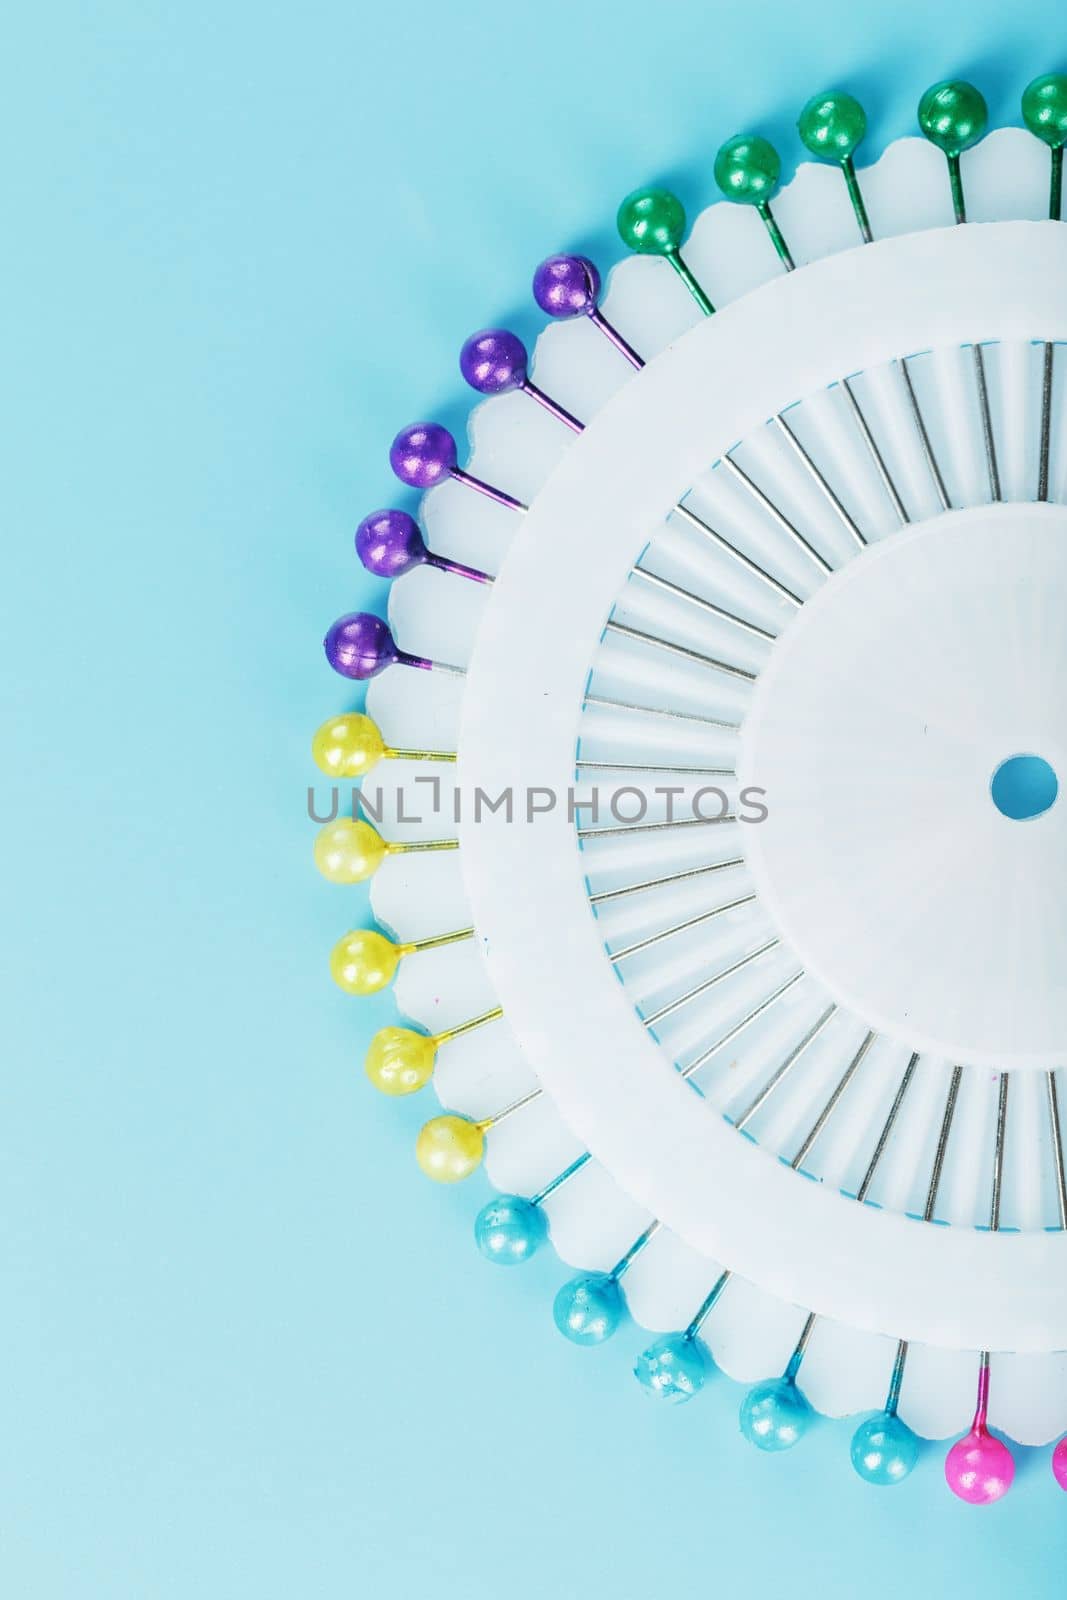 A set of multicolored needles pins in a round platform by AlexGrec